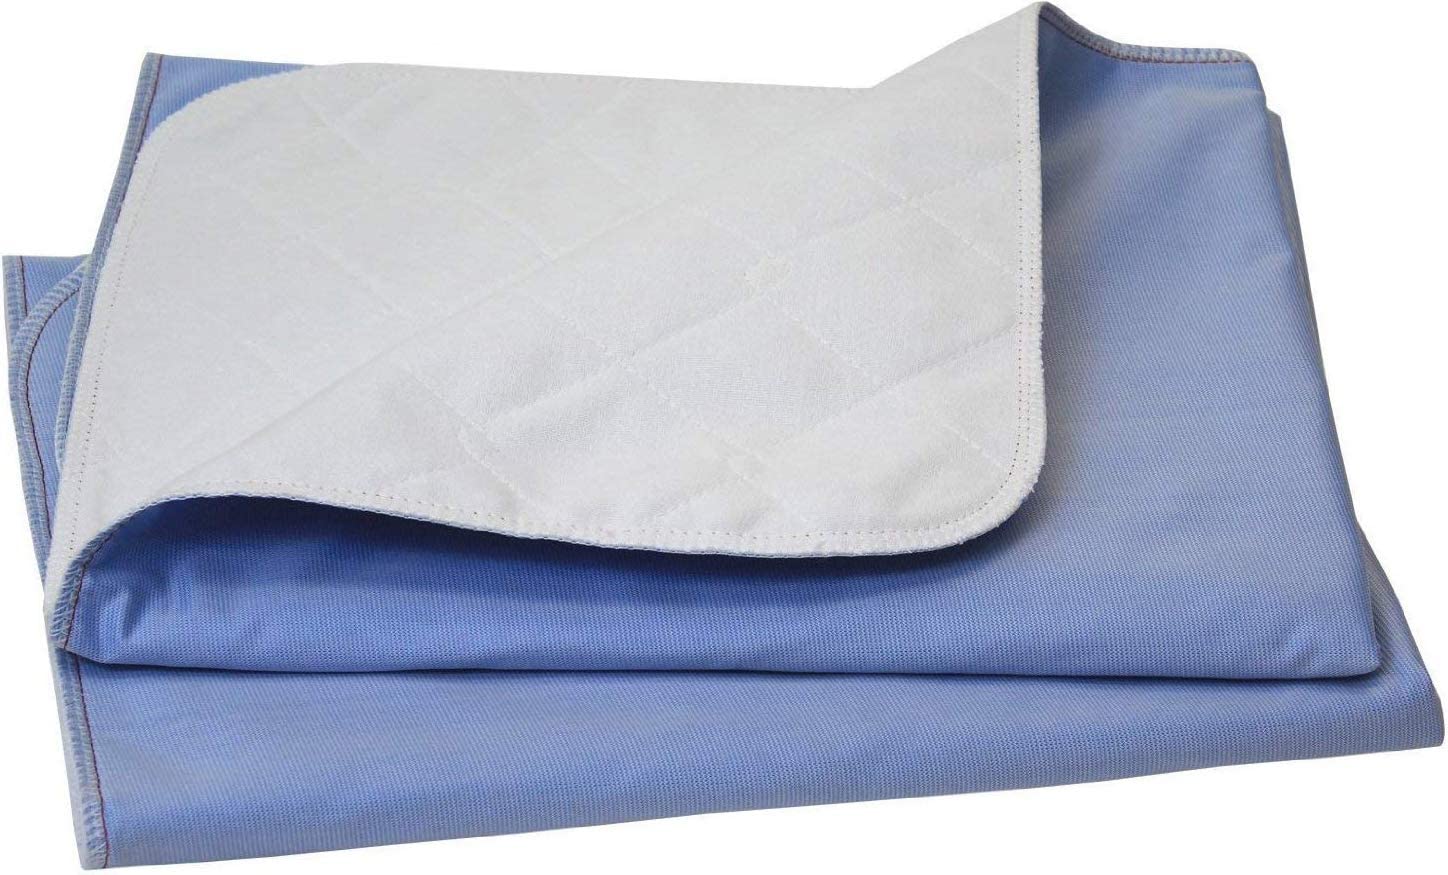 Washable Chux Pads, Bed Pads for Incontinence